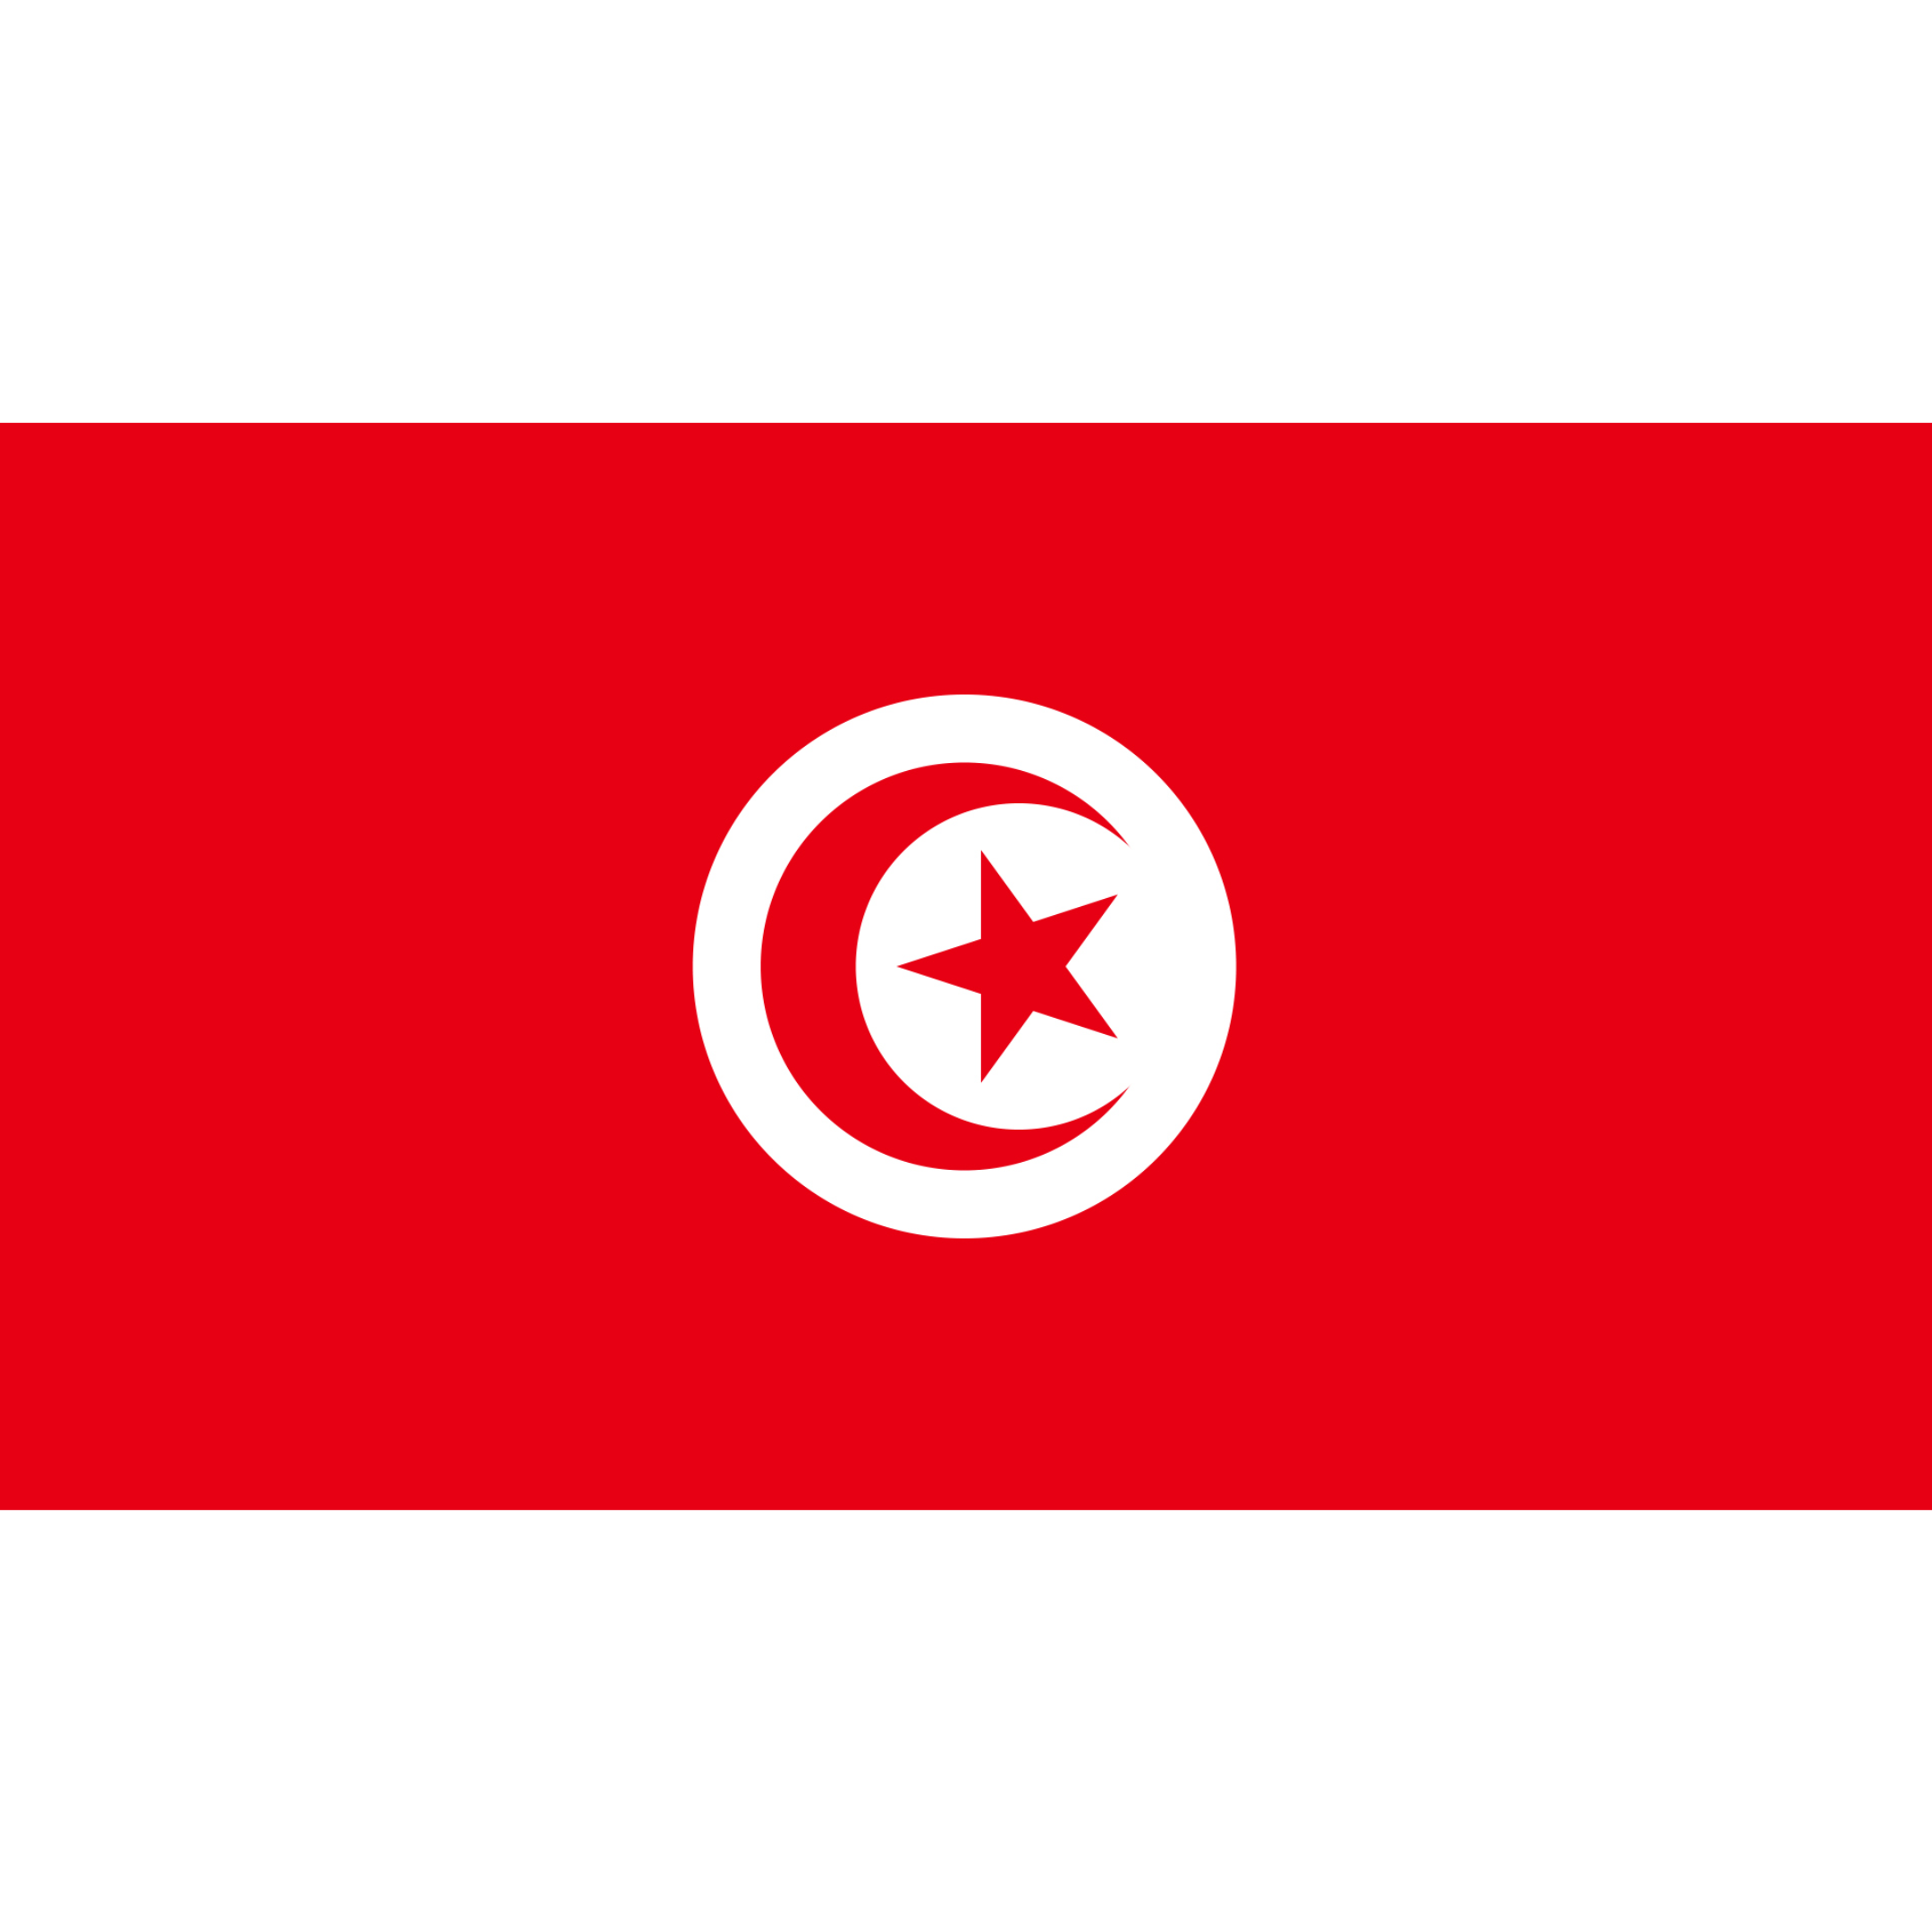 The Tunisia flag has a red background with a white circle in the centre containing a red star surrounded by a red crescent.